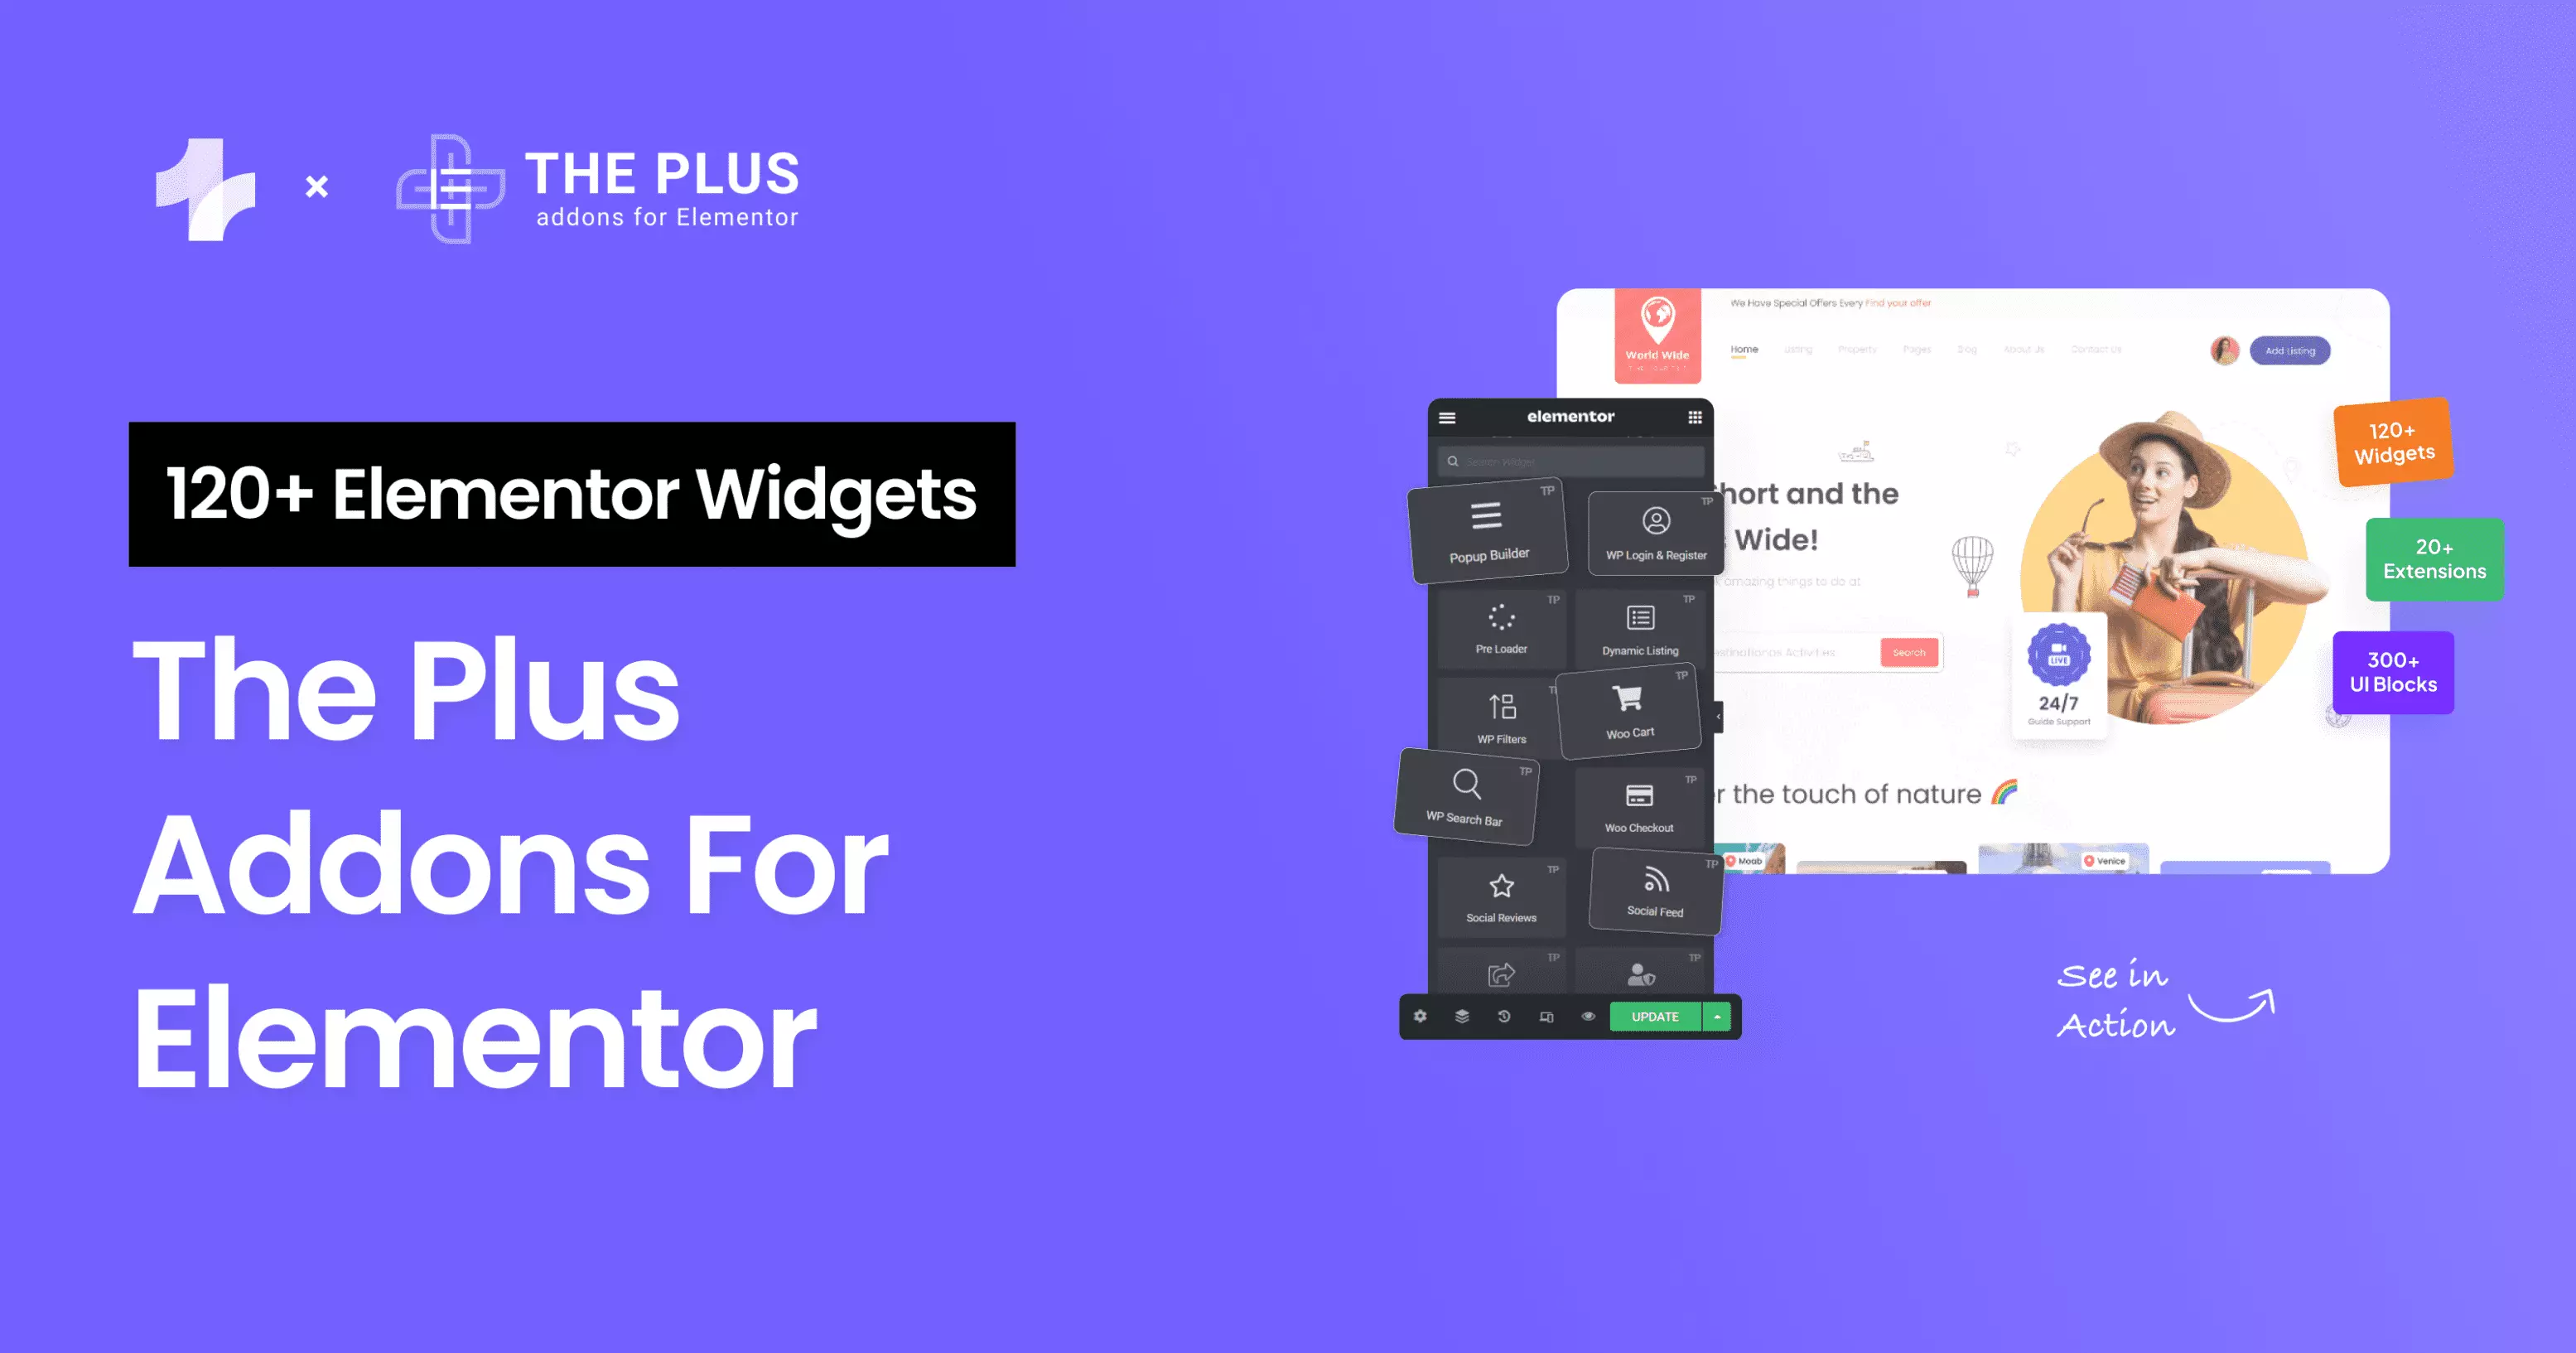 The plus addons for elementor 120+ elementor widgets & extensions - best free elementor addons from the plus addons for elementor